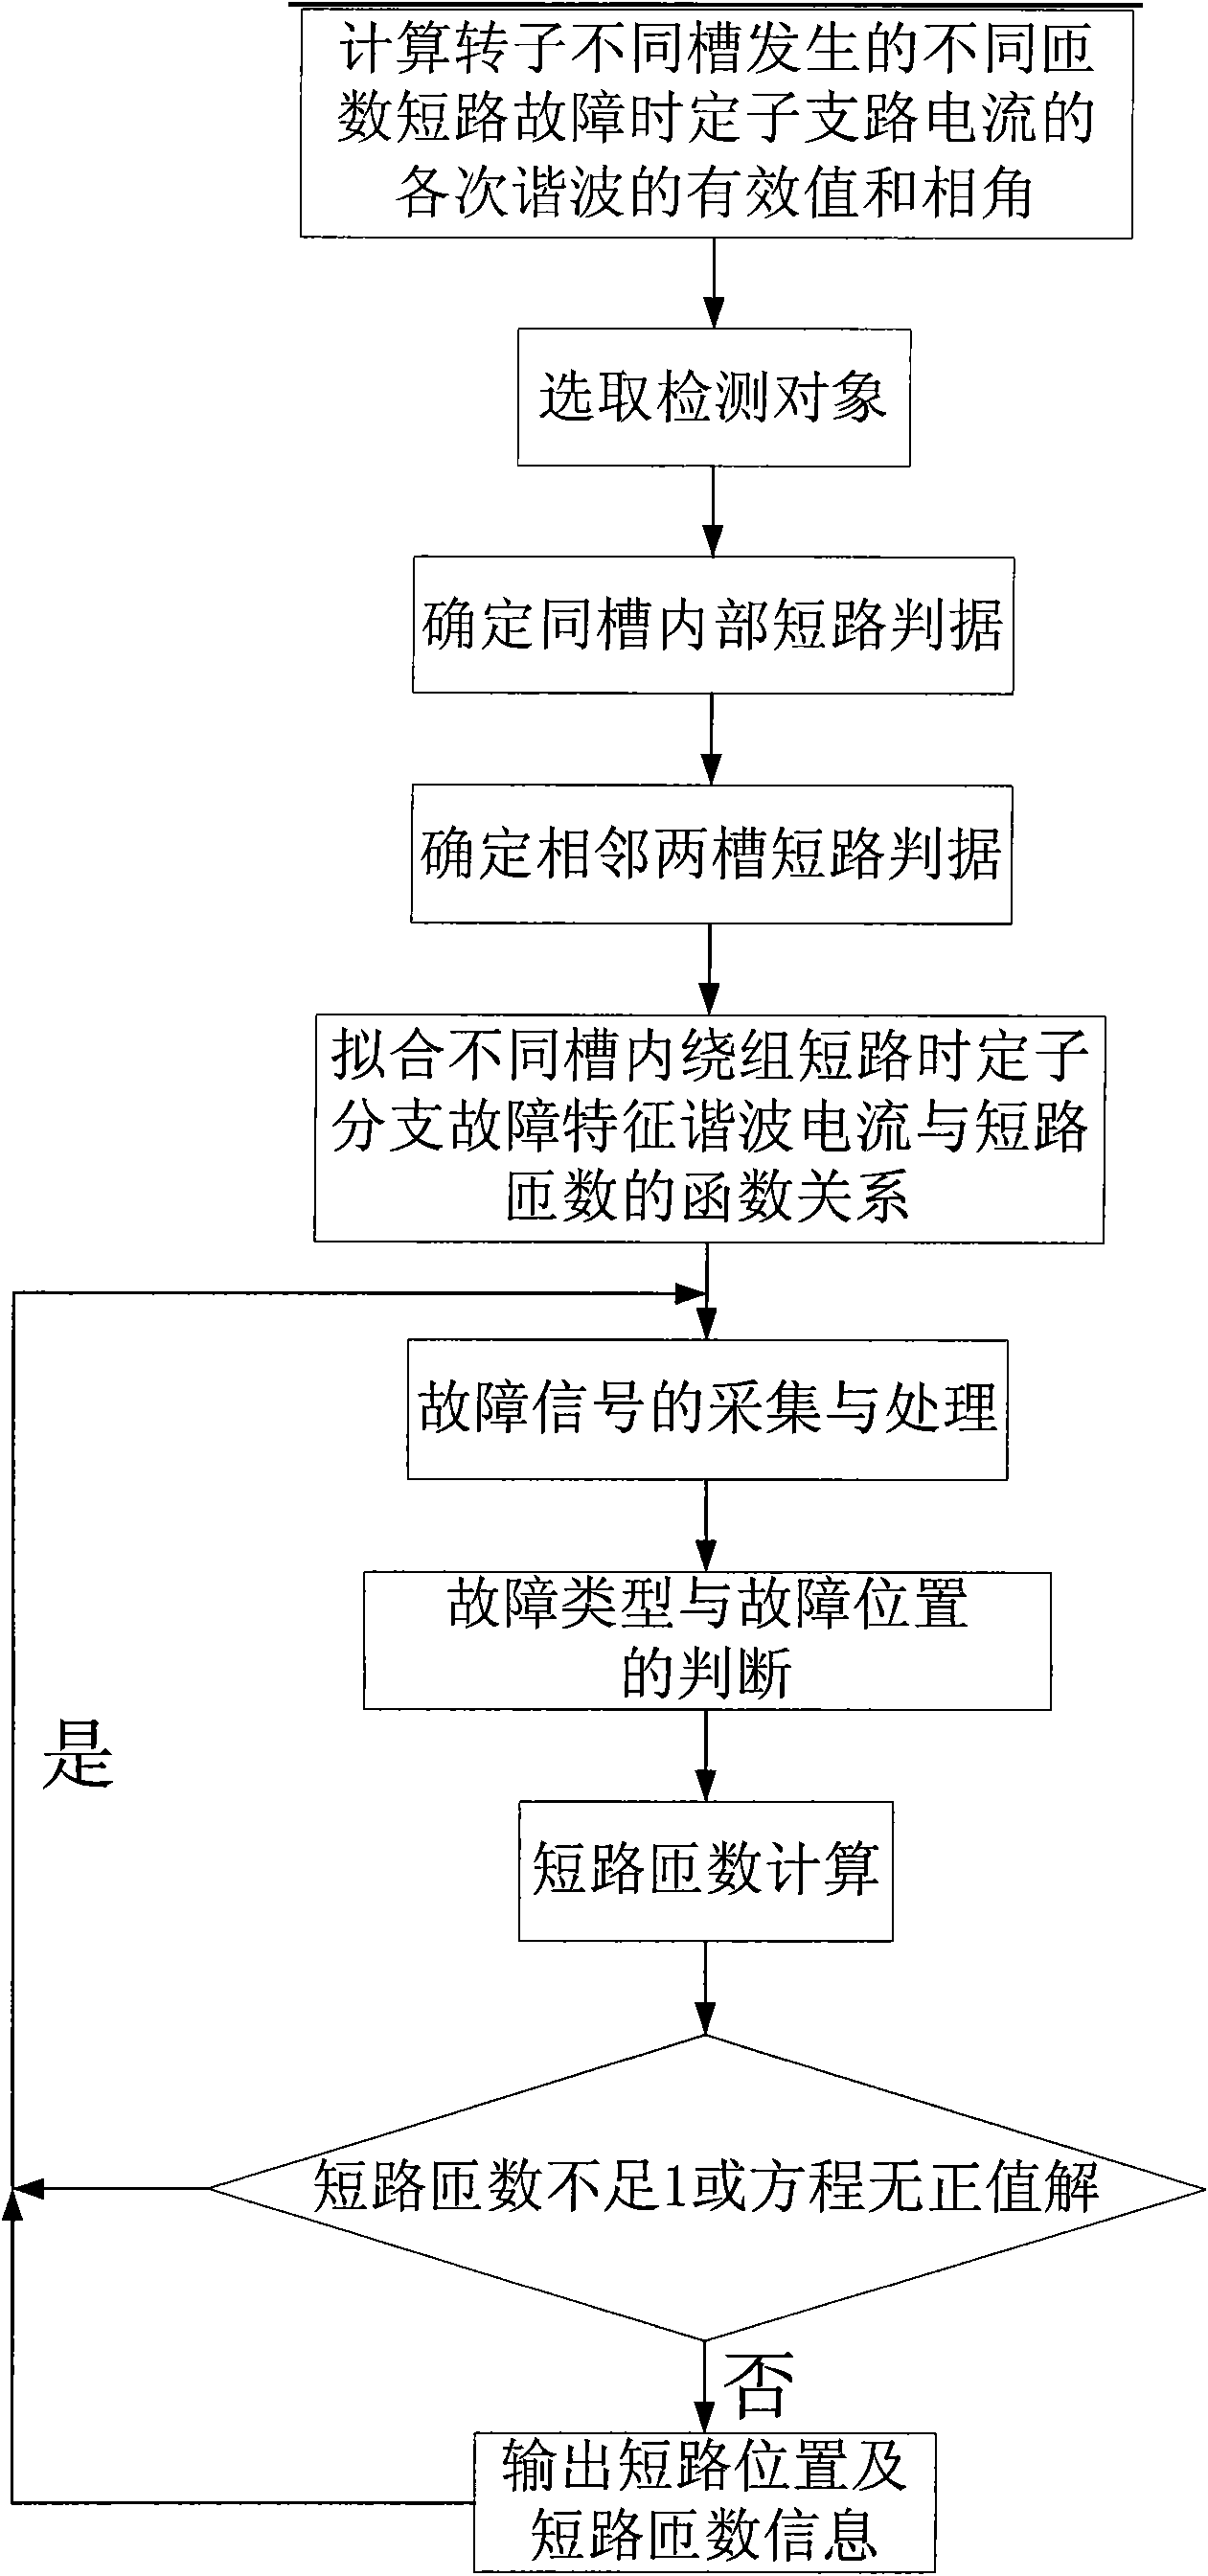 Method for judging turn-to-turn short circuit fault position and number of short circuit turns of steam turbine generator rotor